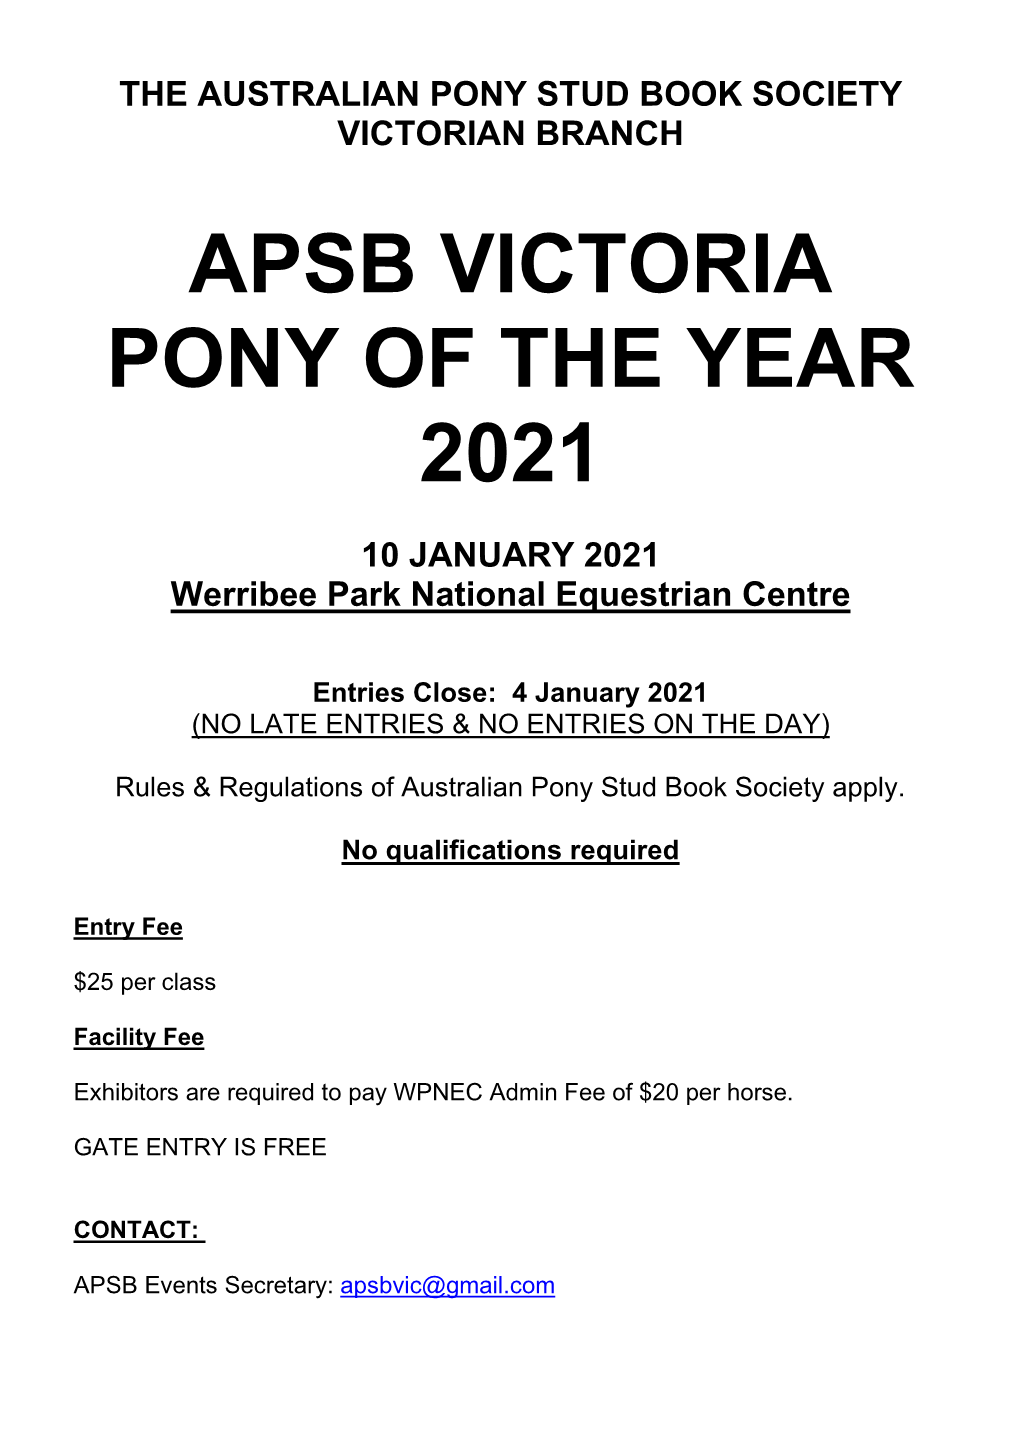 Apsb Victoria Pony of the Year 2021